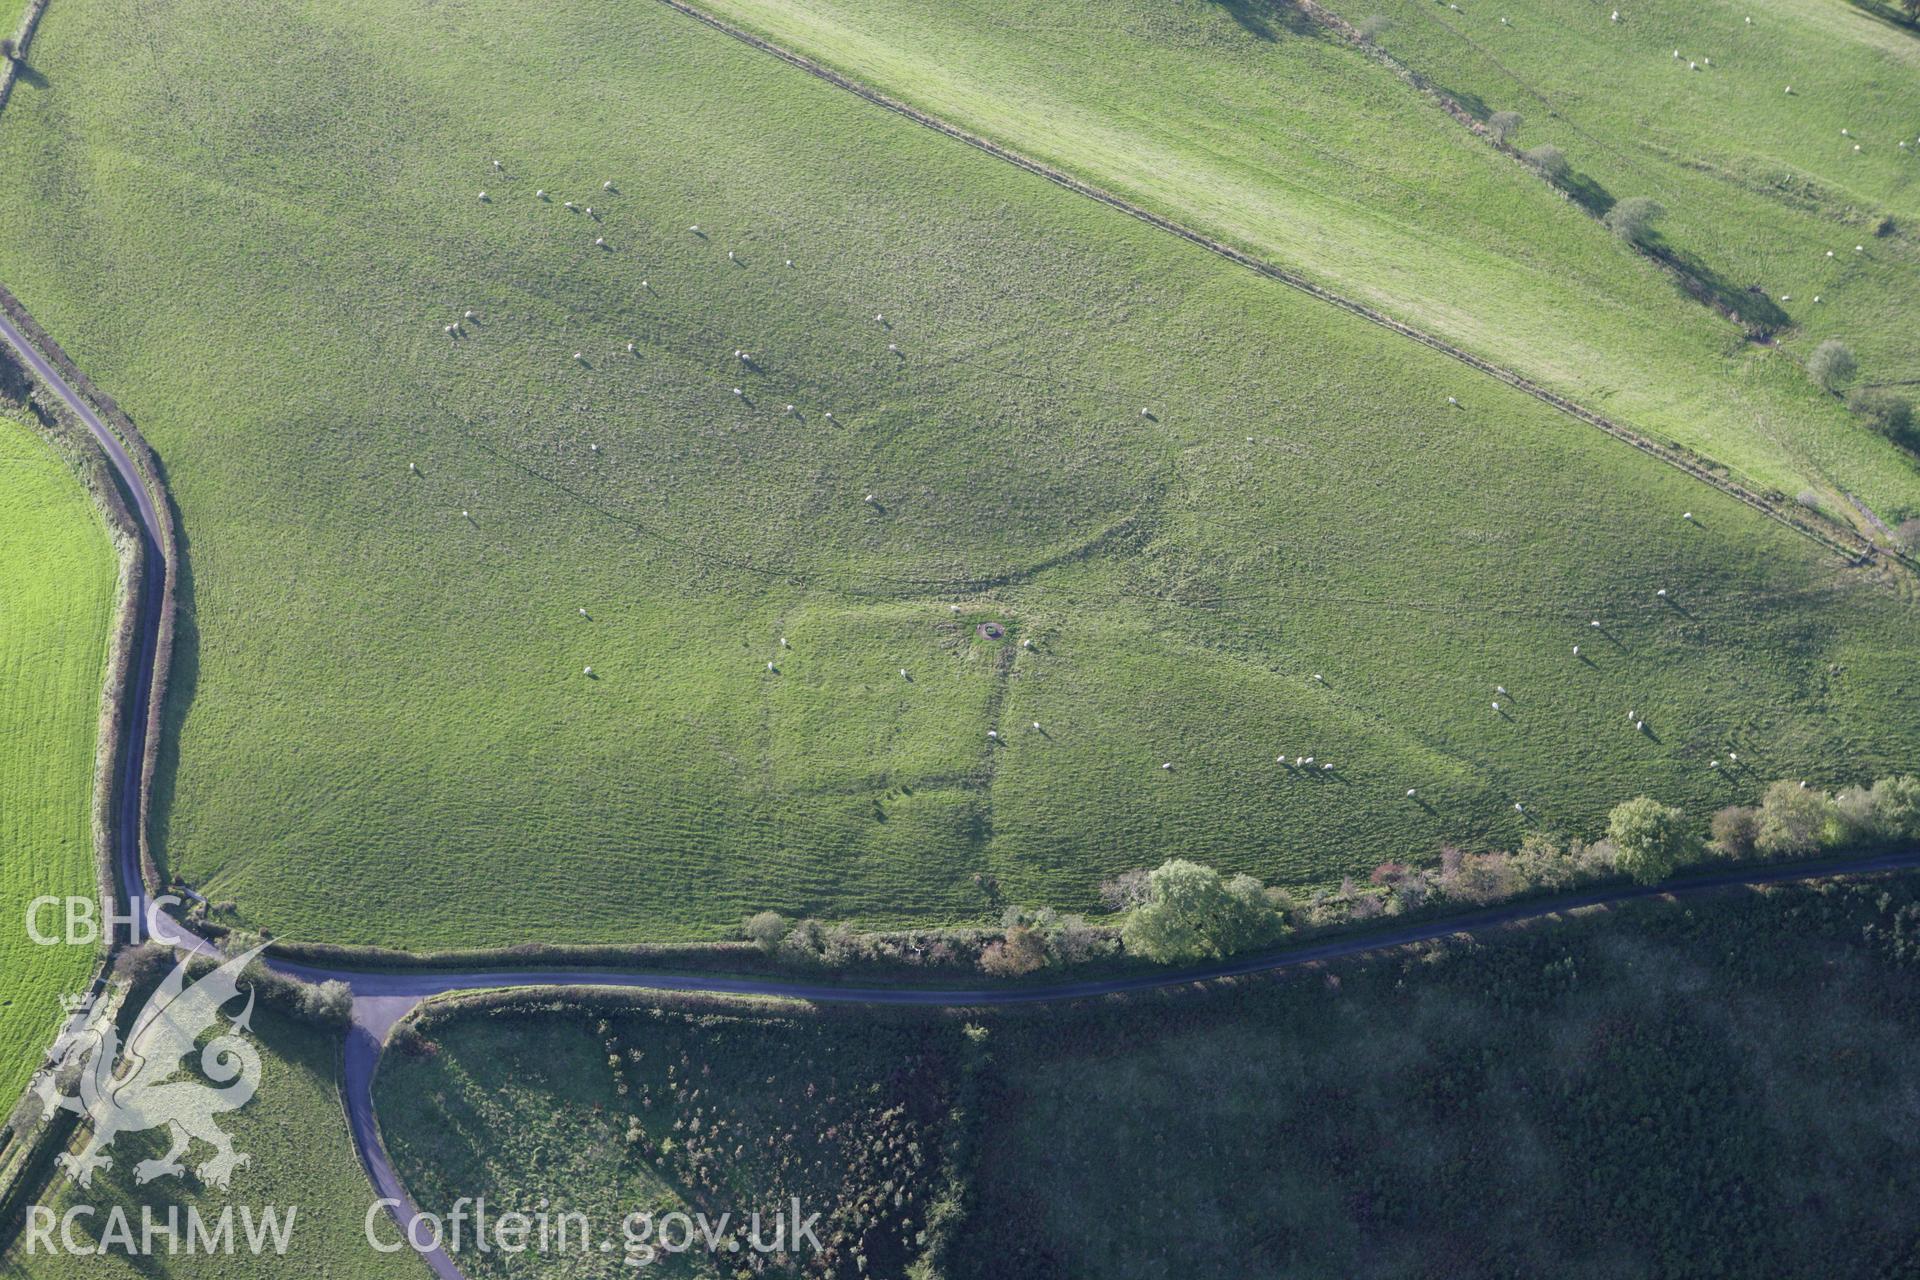 RCAHMW colour oblique photograph of Cwmargenau, possible Roman fortlet. Taken by Toby Driver on 04/10/2007.